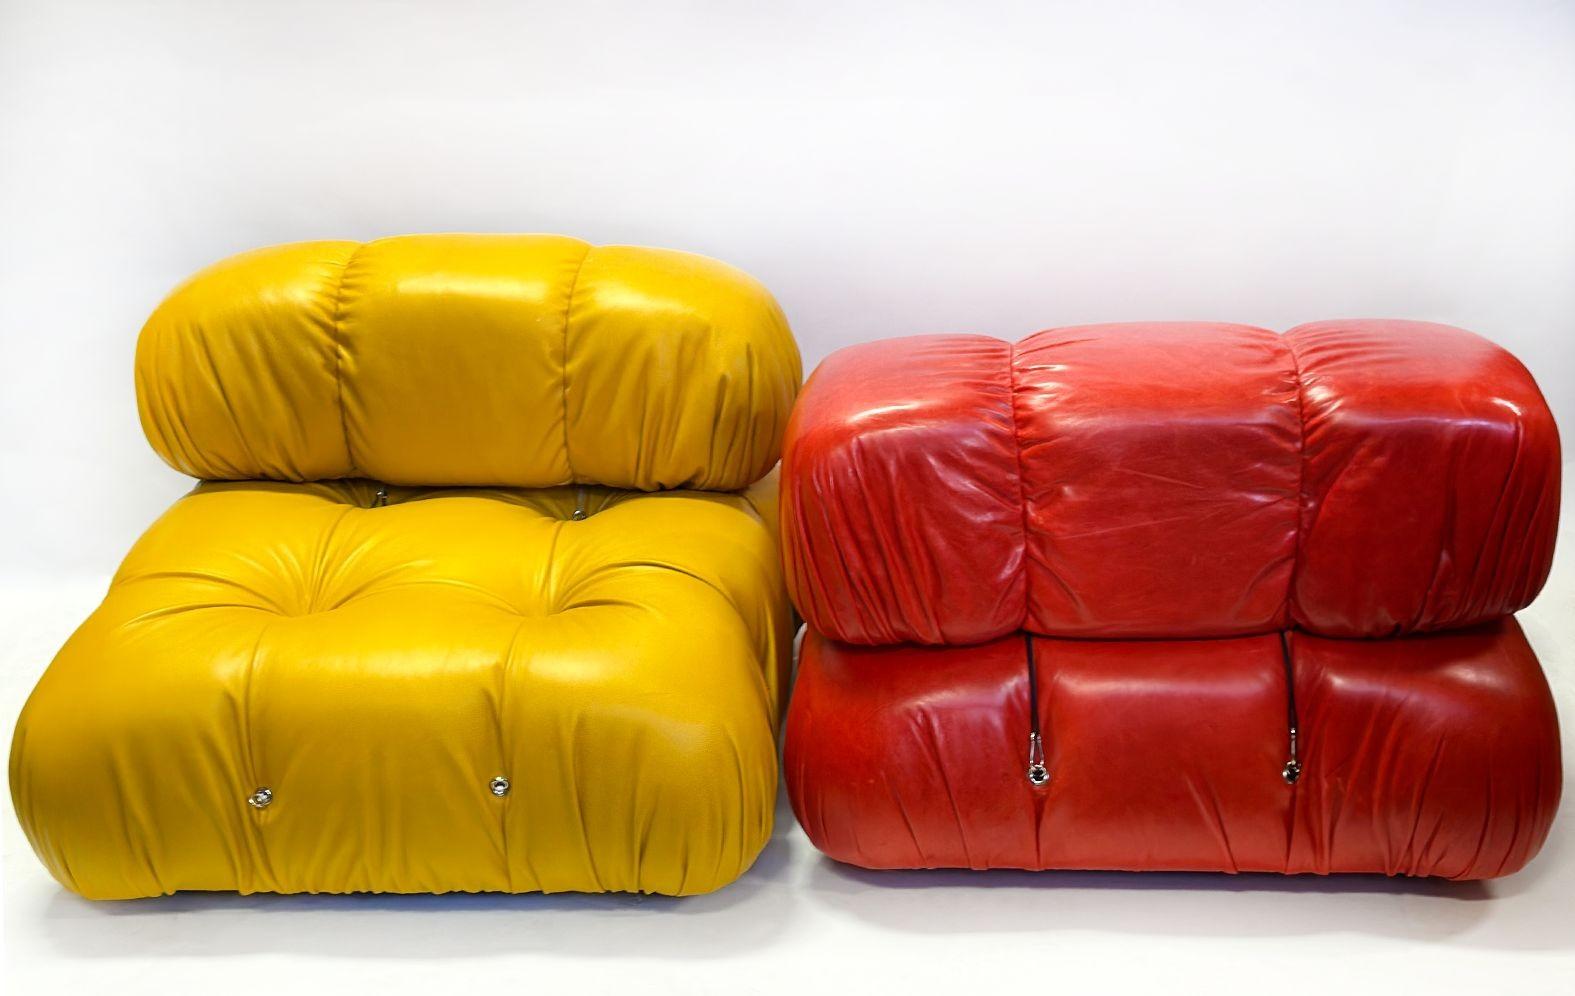 Colorful four-seat leather sectional sofa made by Mario Bellini in the 1970's. Each removable seat stands out by its unique colors including hot orange, dark turquoise, honey yellow, and bright red. The adjustable feature allows for easy